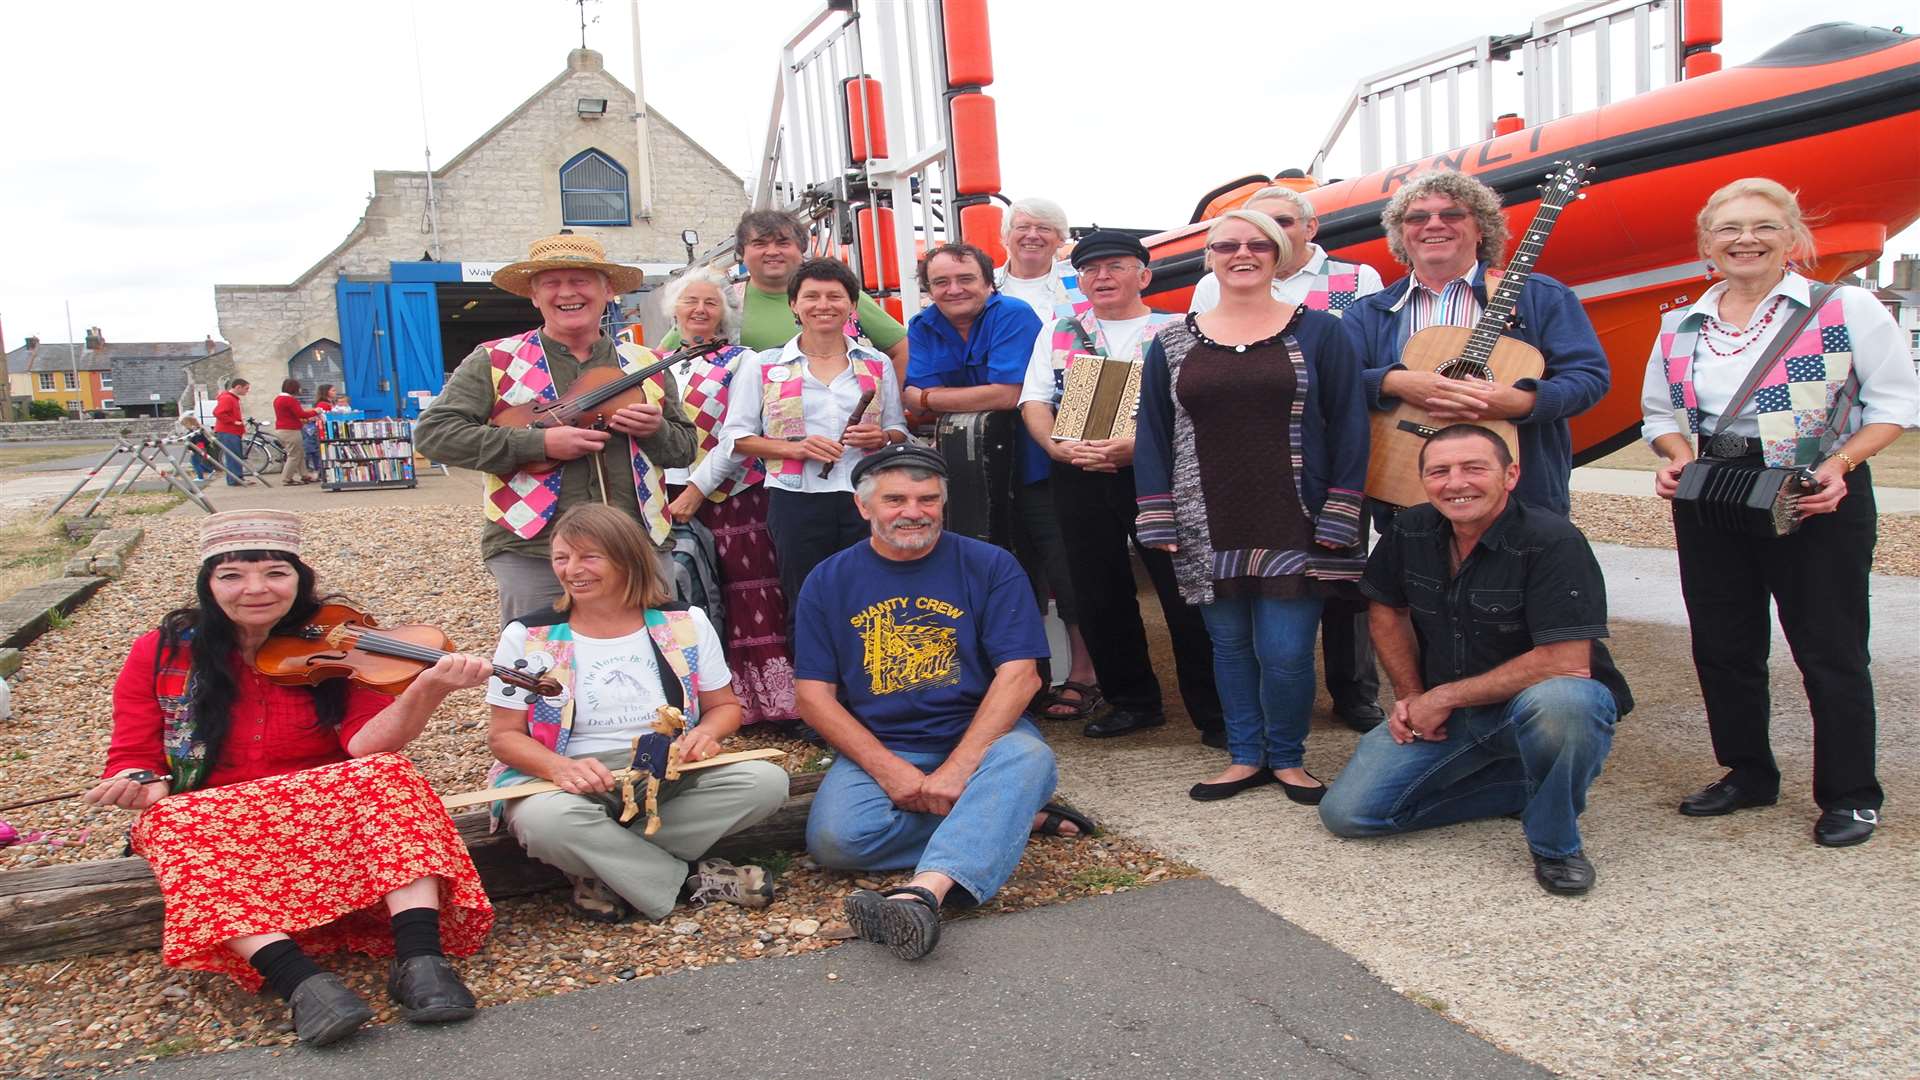 Kerry with folk musicians in Deal